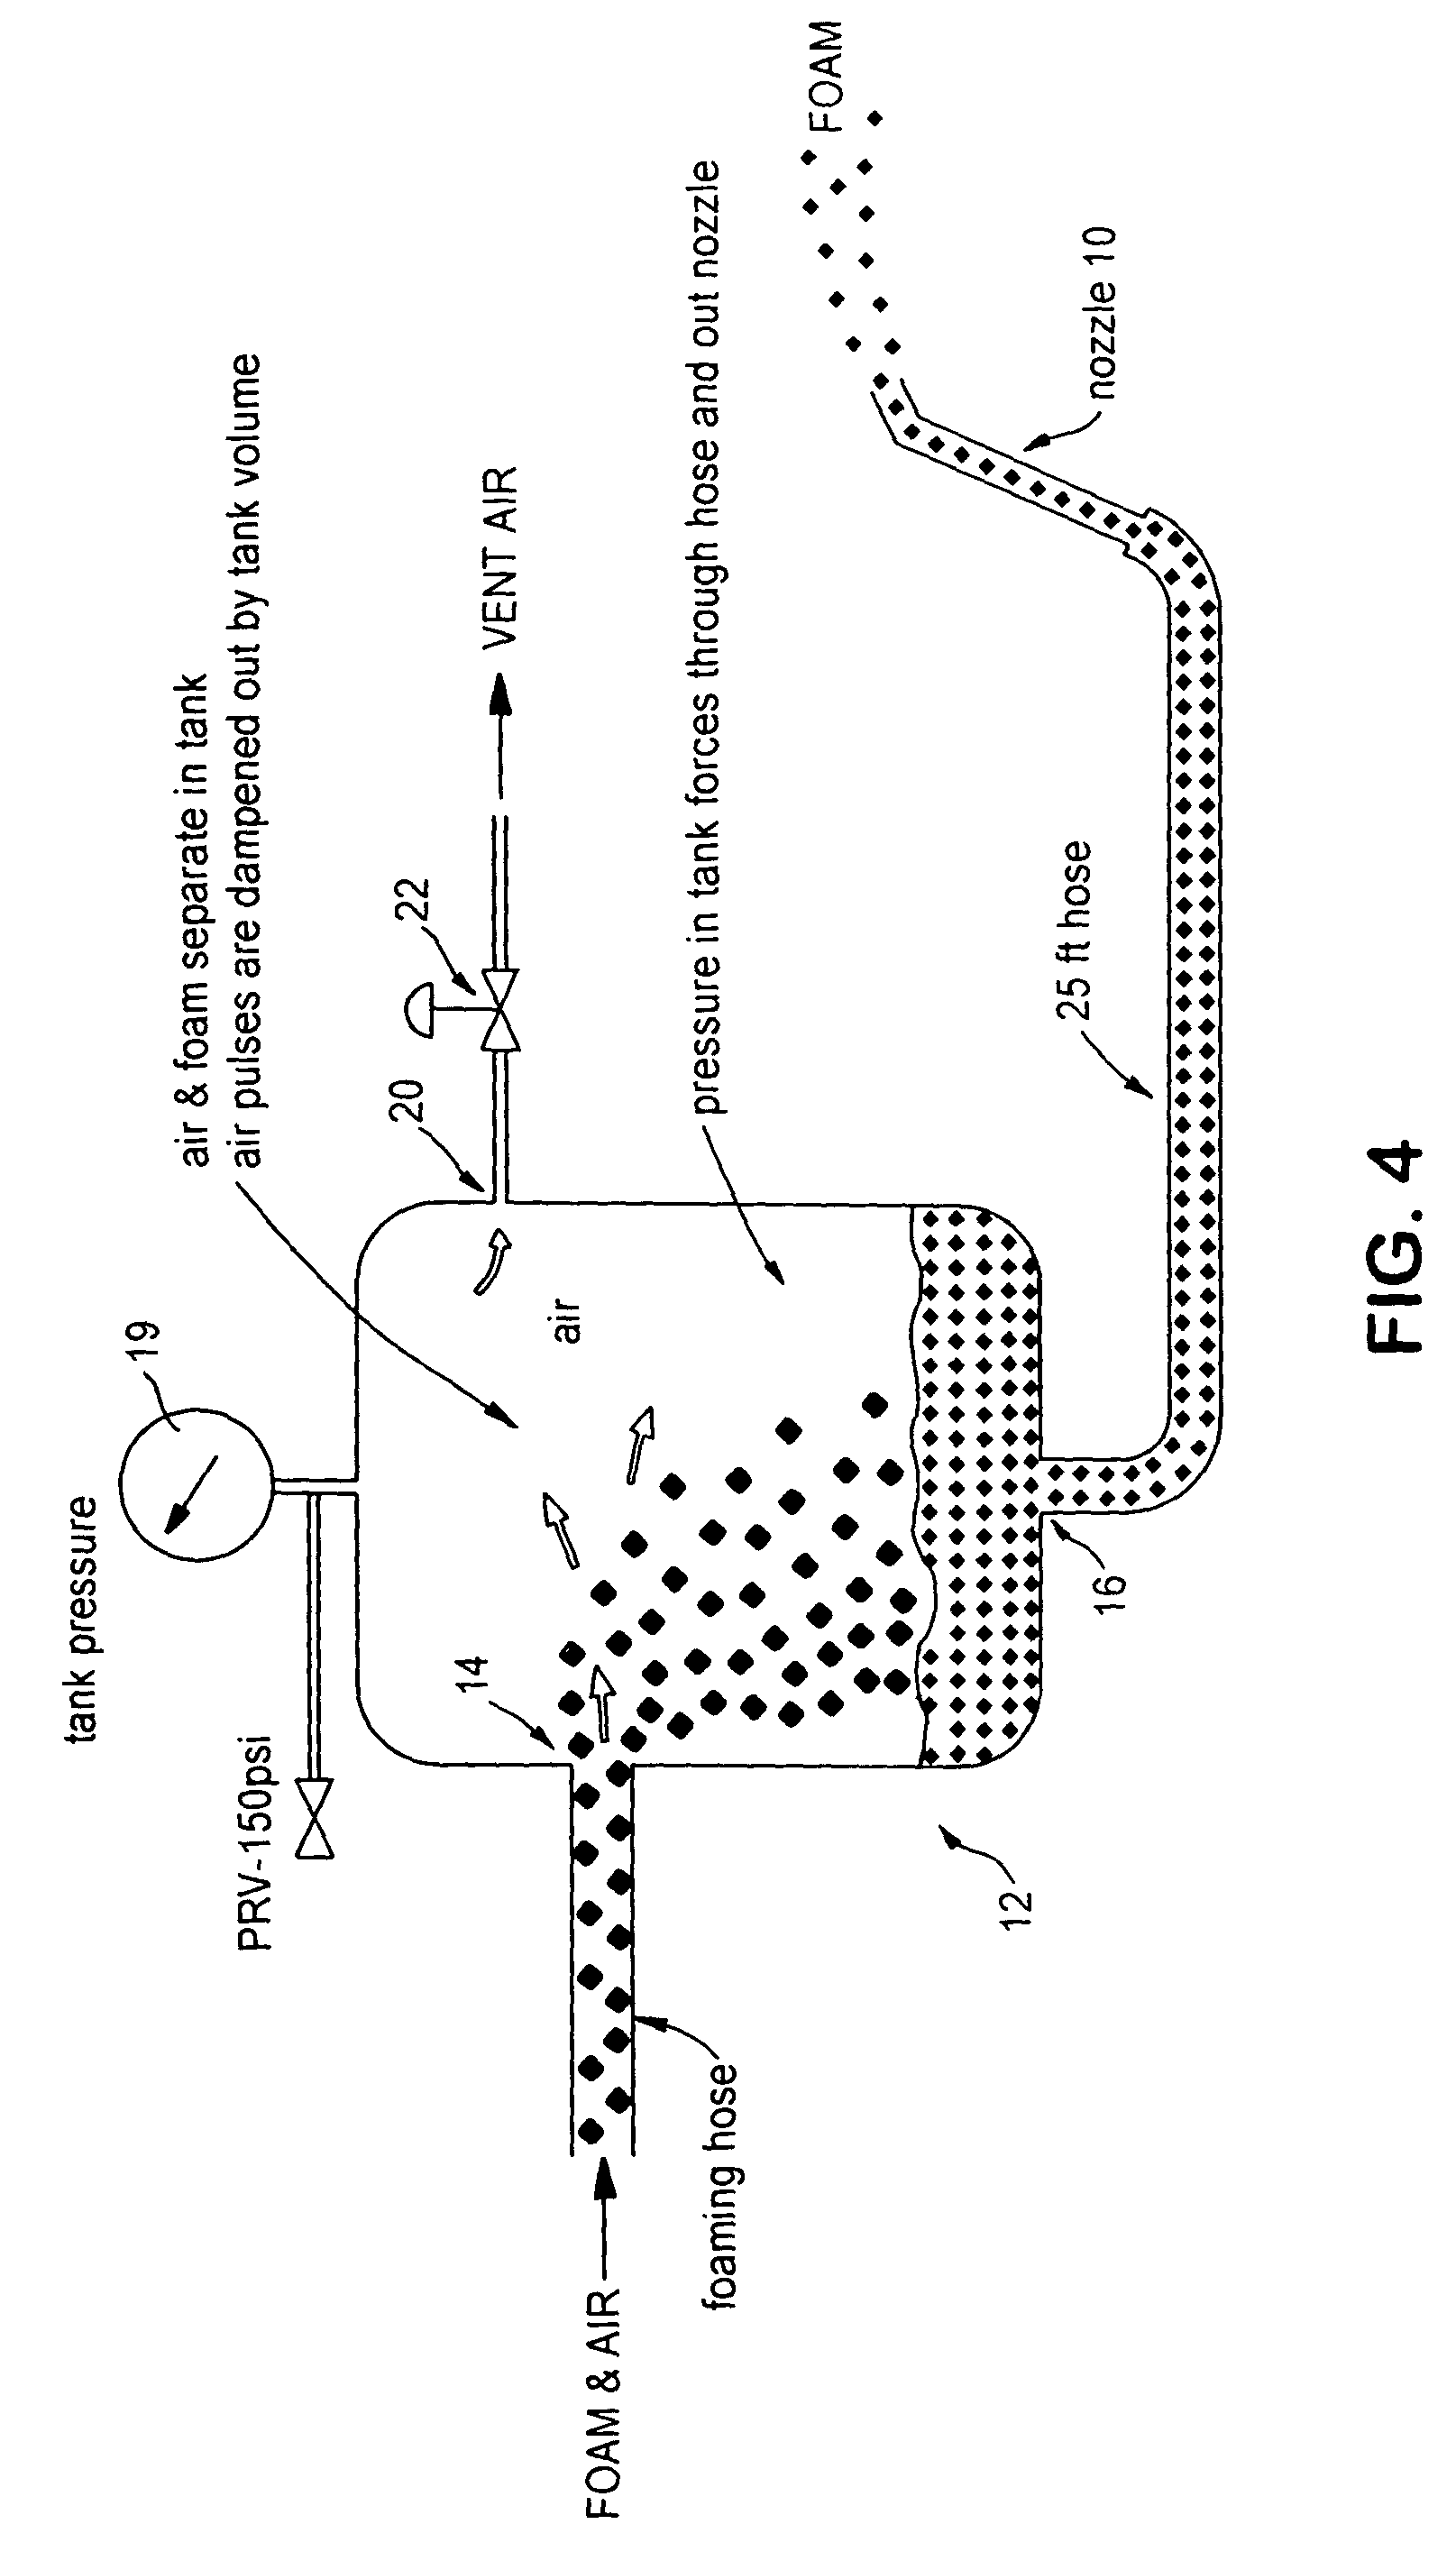 Foamed fireproofing composition and method